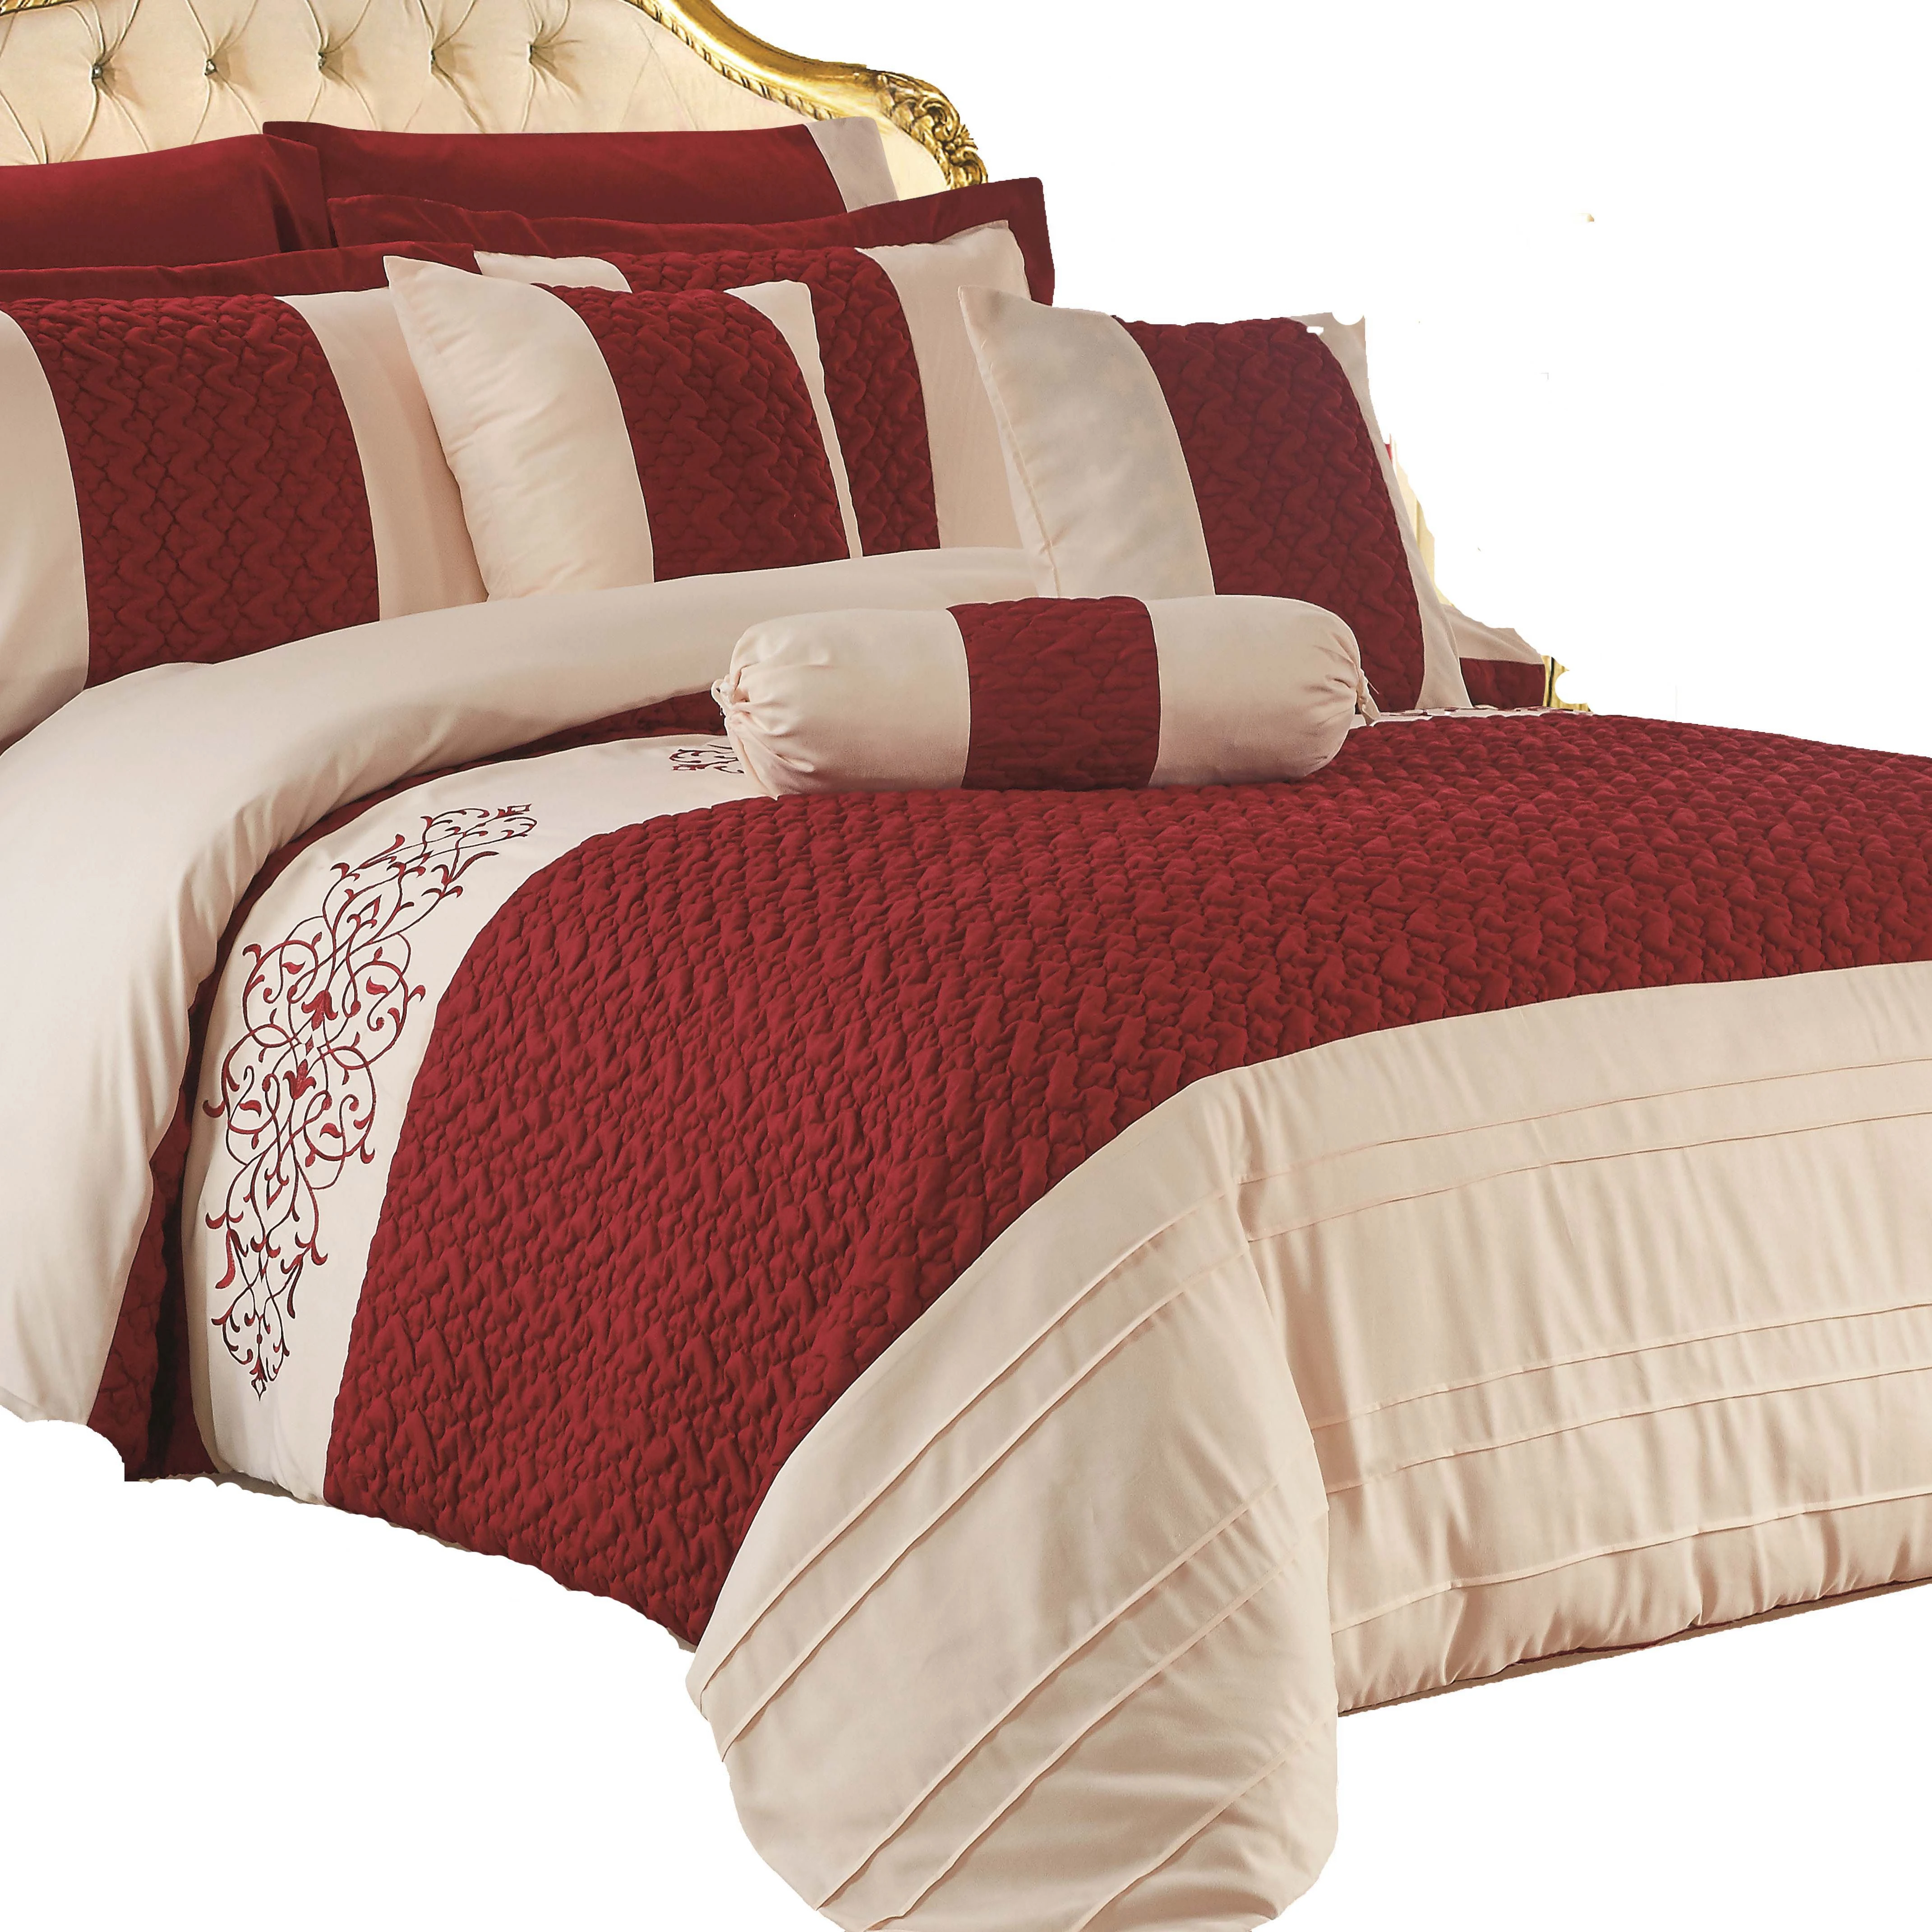 Factory 90gsm microfiber embroidery red comforter sets